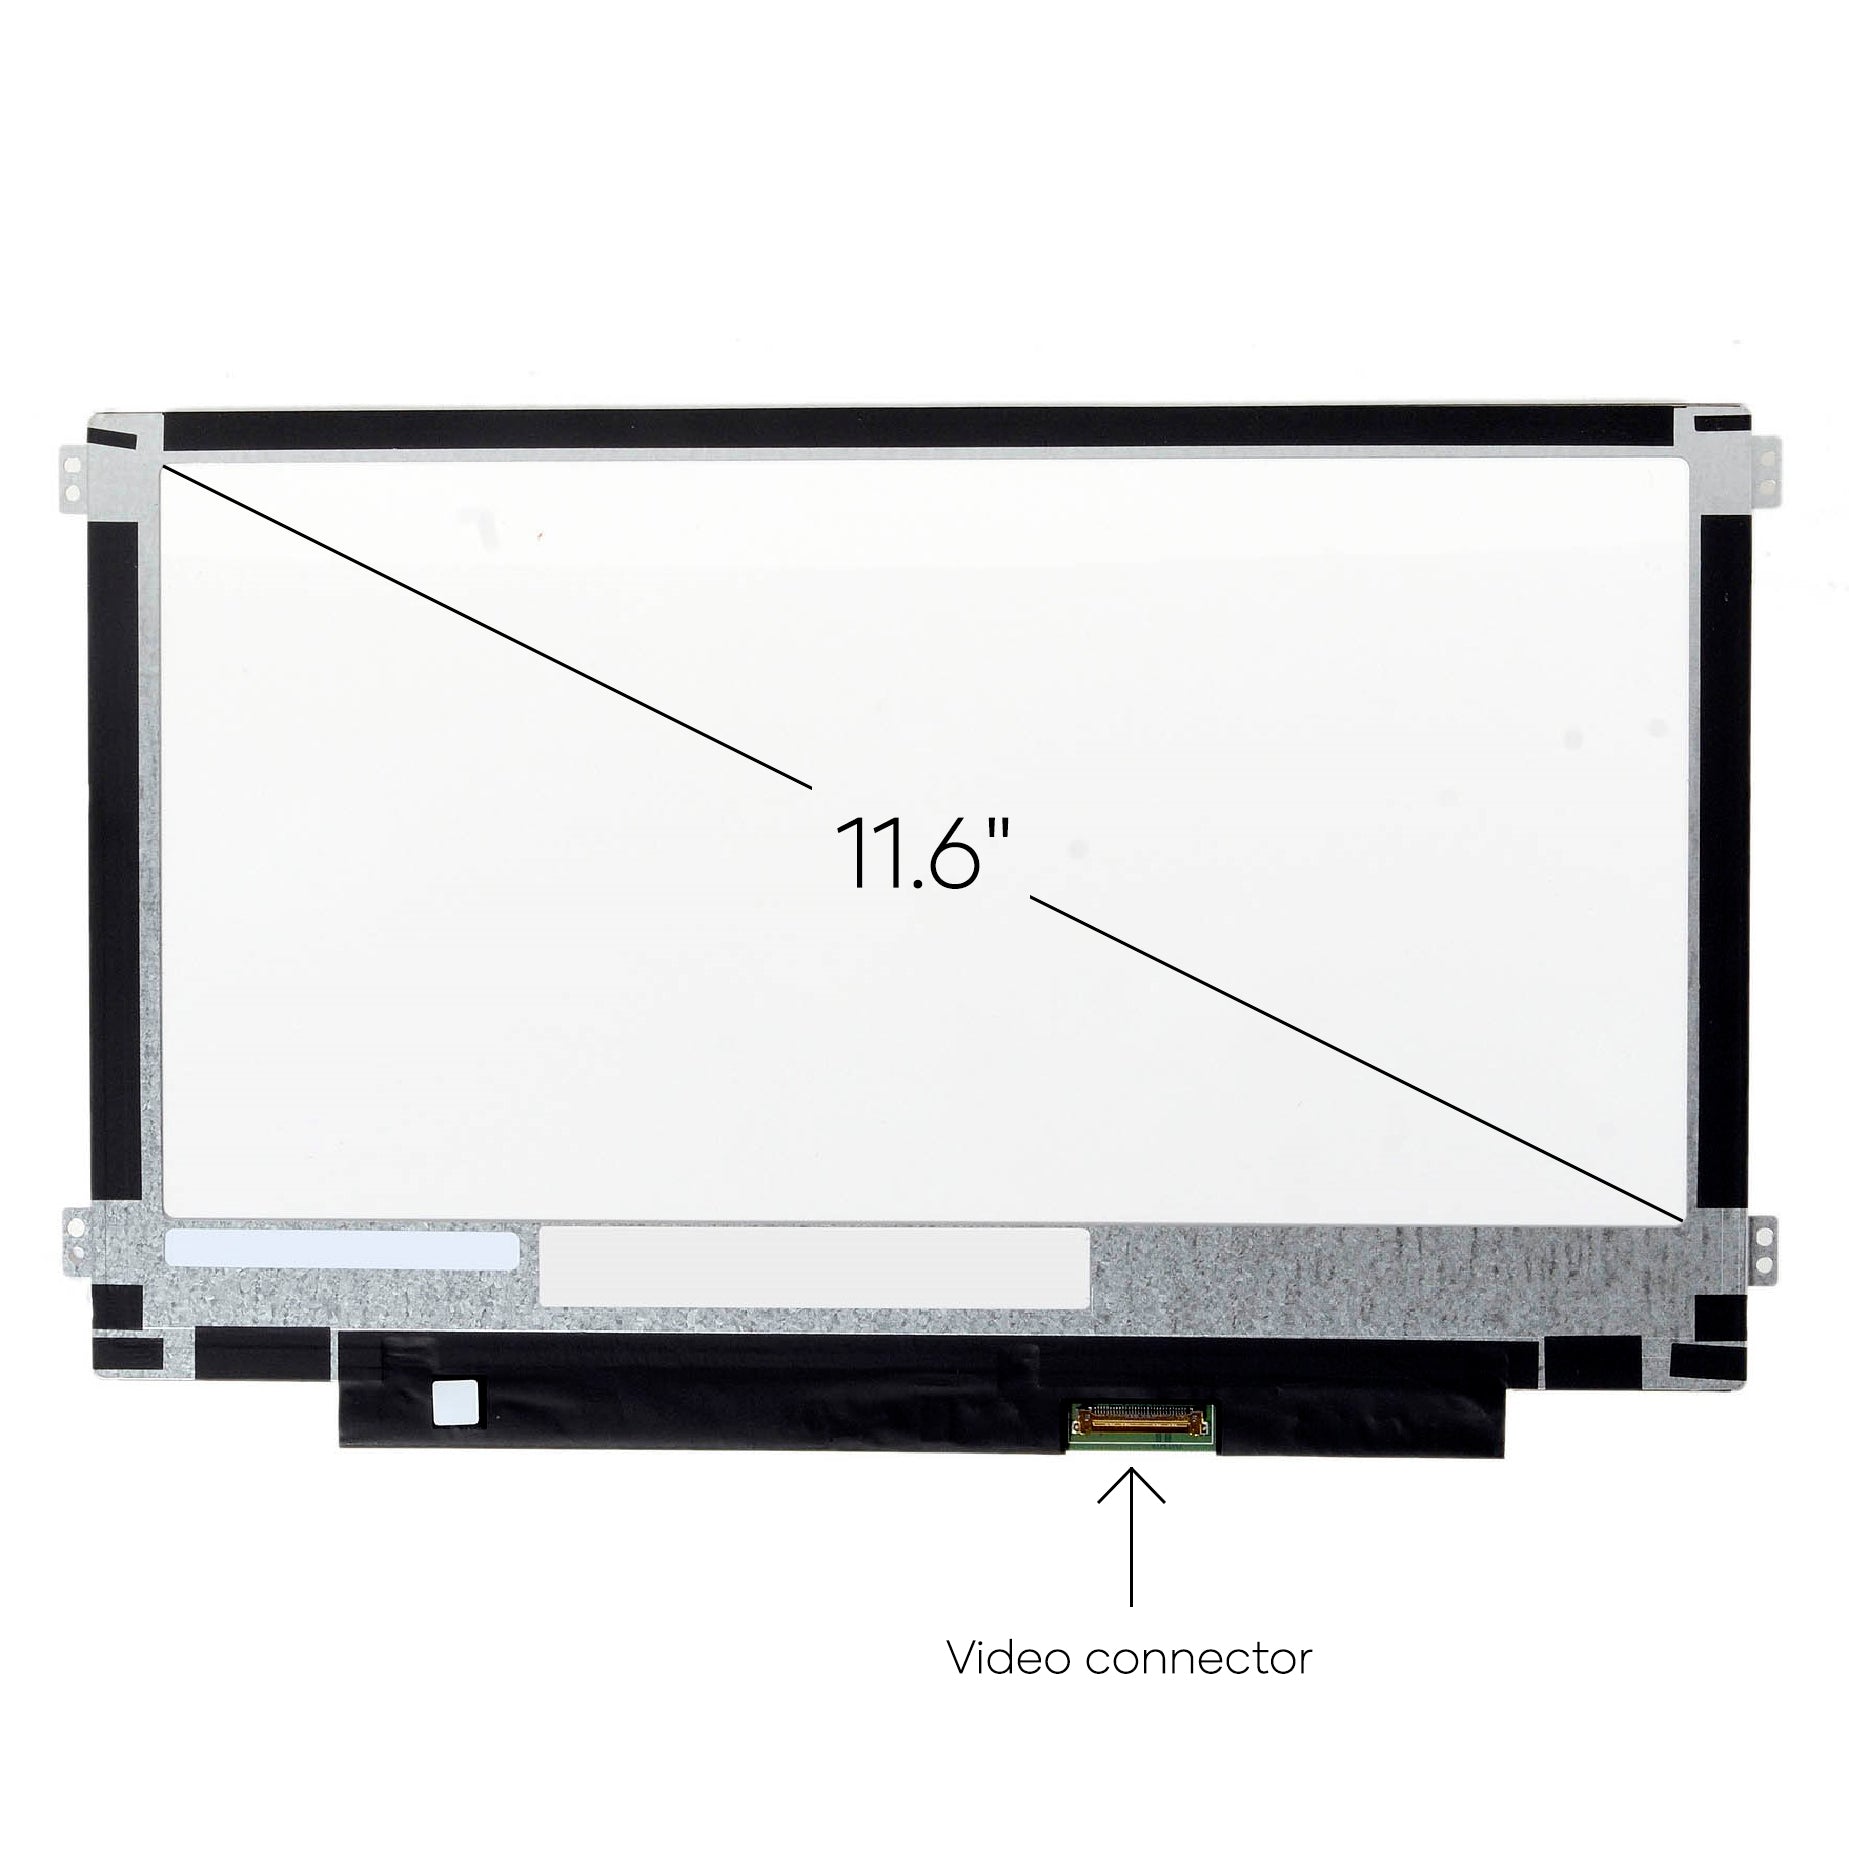 Screen Replacement for Acer Chromebook CB3-111-C8UB HD 1366x768 Matte LCD LED Display